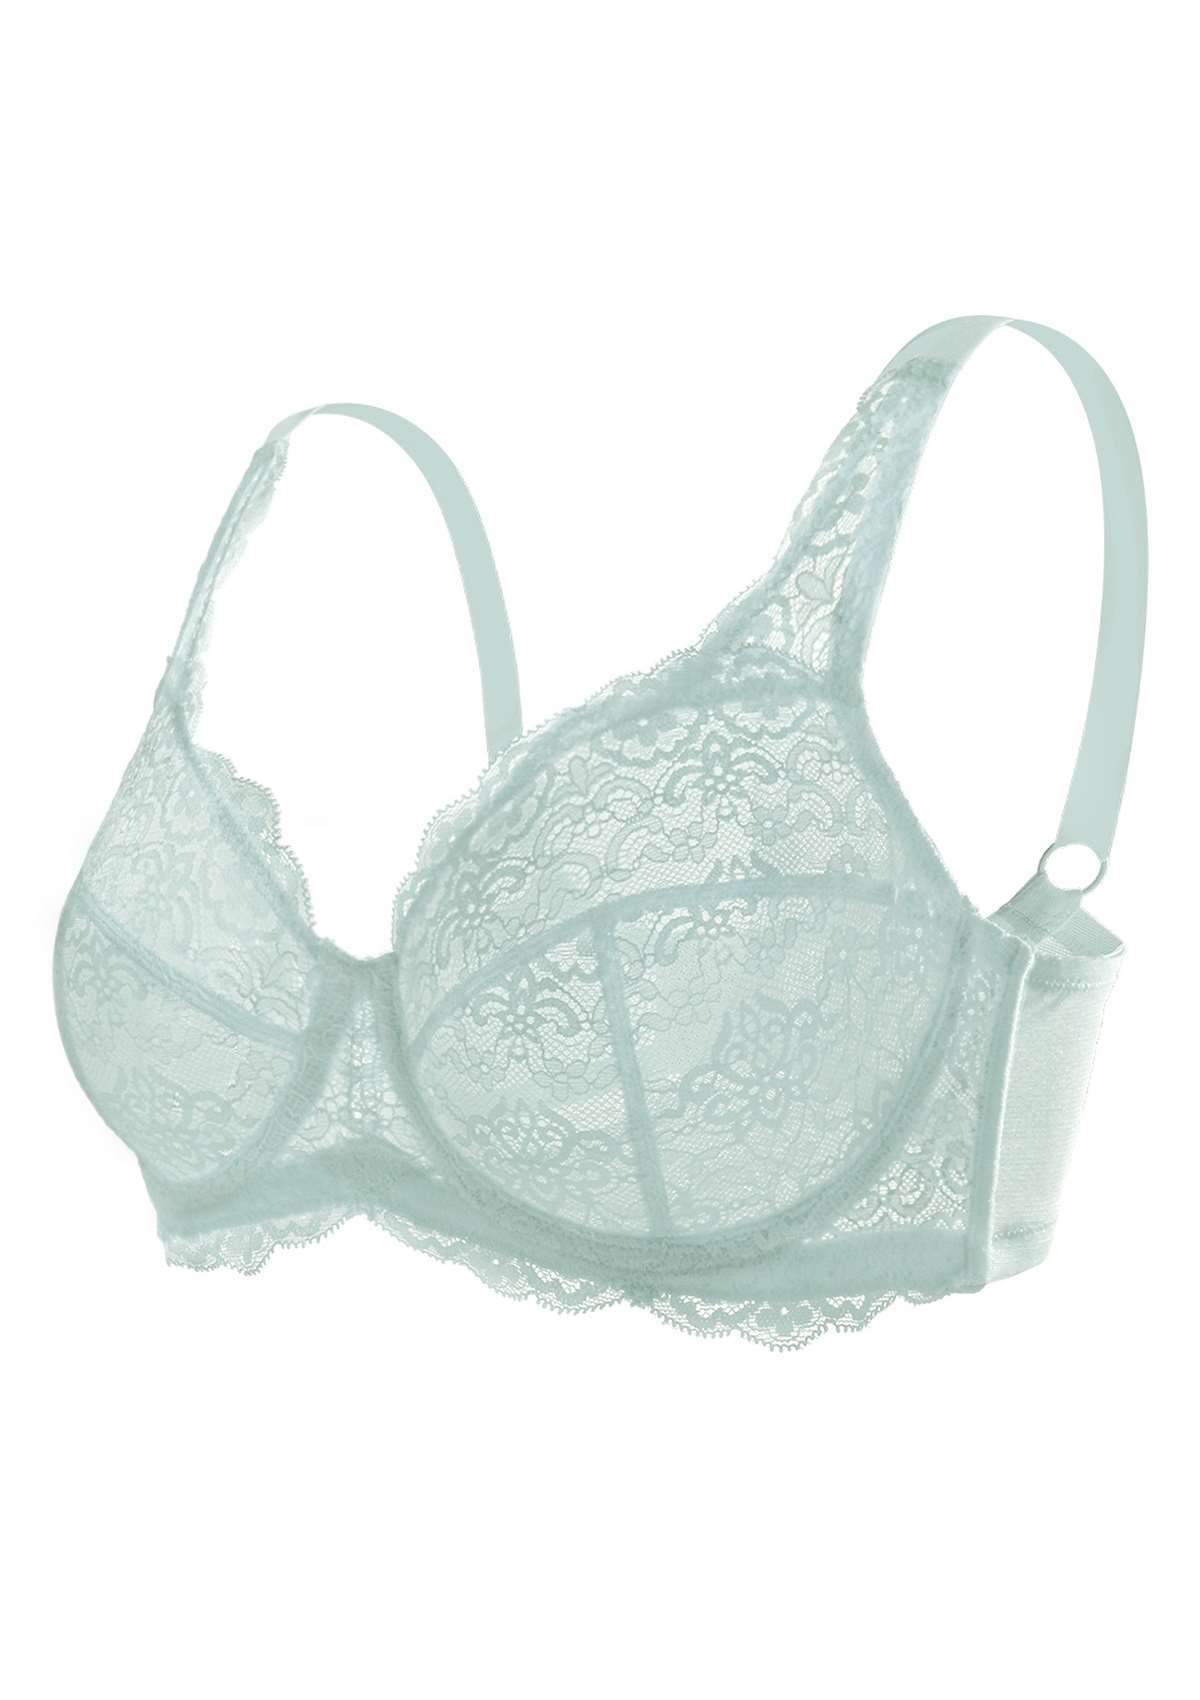 HSIA All-Over Floral Lace: Best Bra For Elderly With Sagging Breasts - Crystal Blue / 40 / DD/E